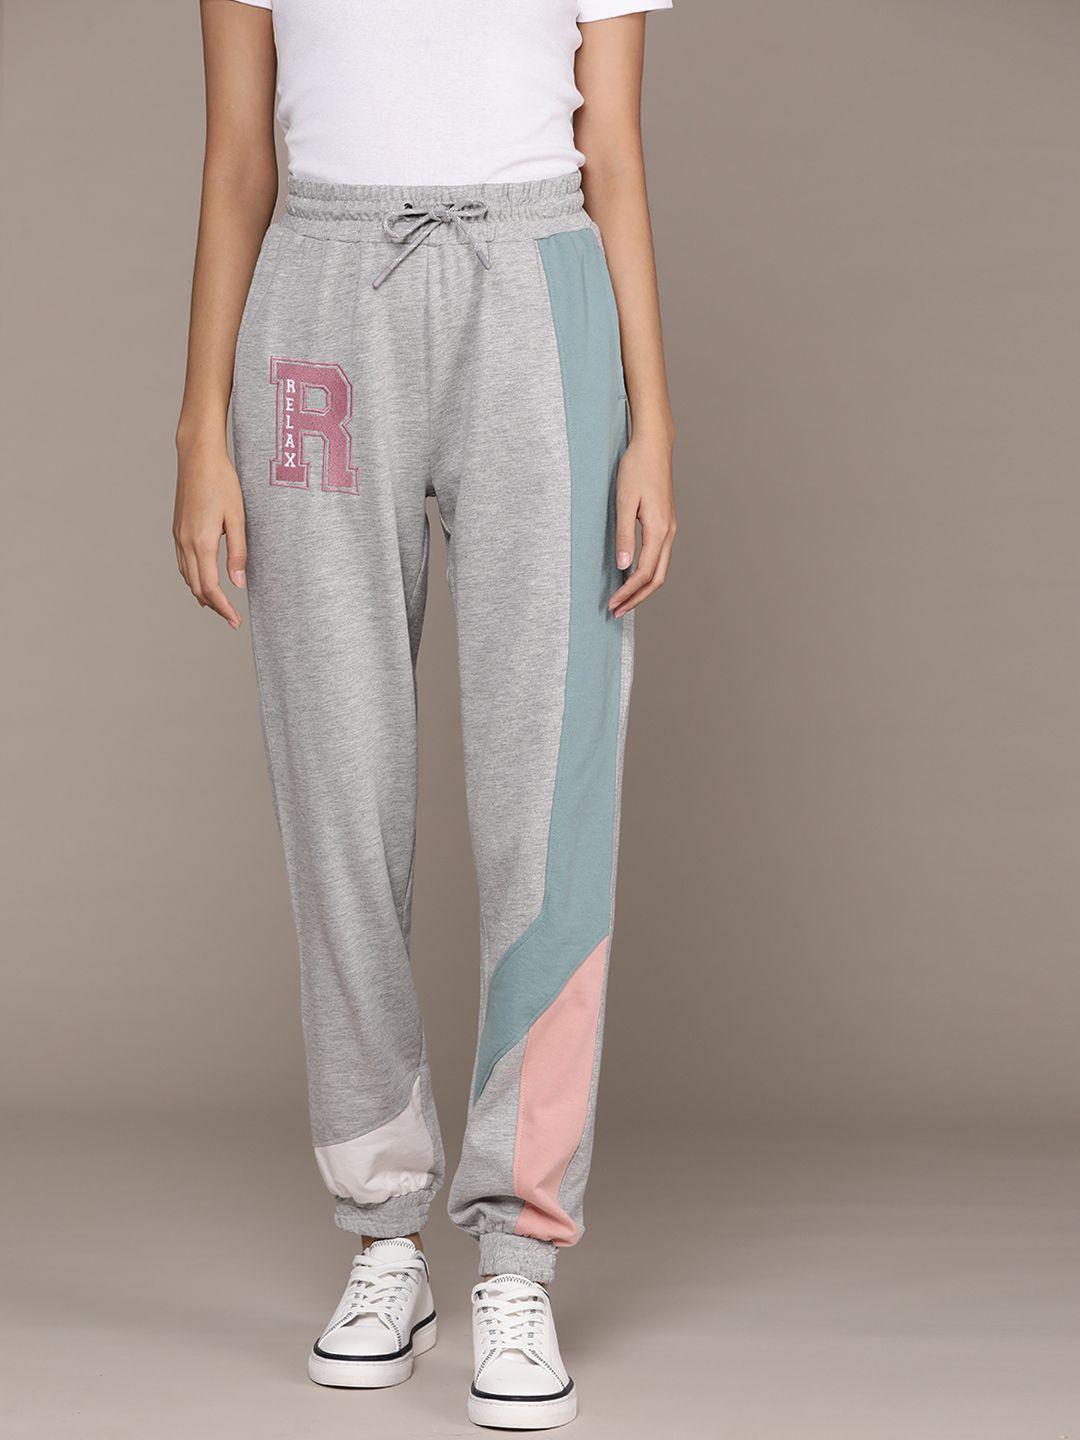 the-roadster-lifestyle-co.-x-re/lax-women-striped-joggers